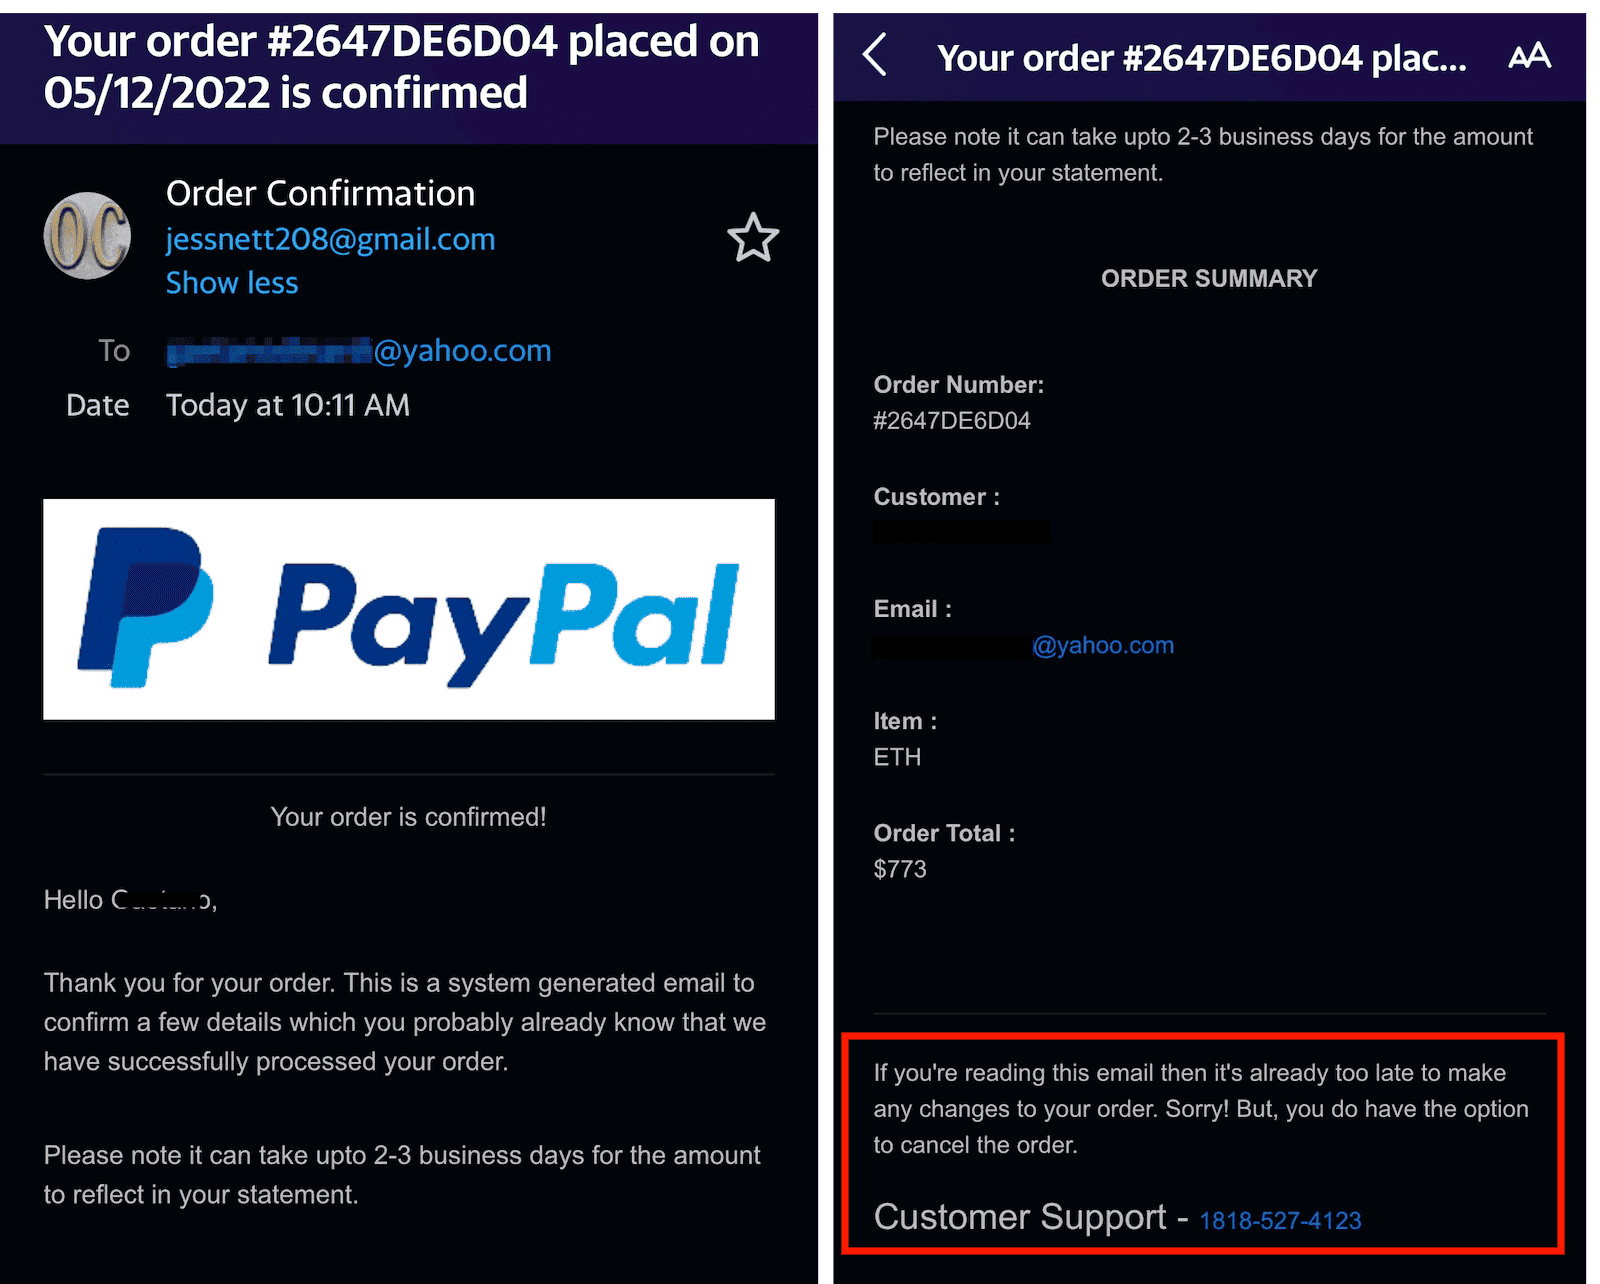 Avoiding Common Type of Scams | PayPal US